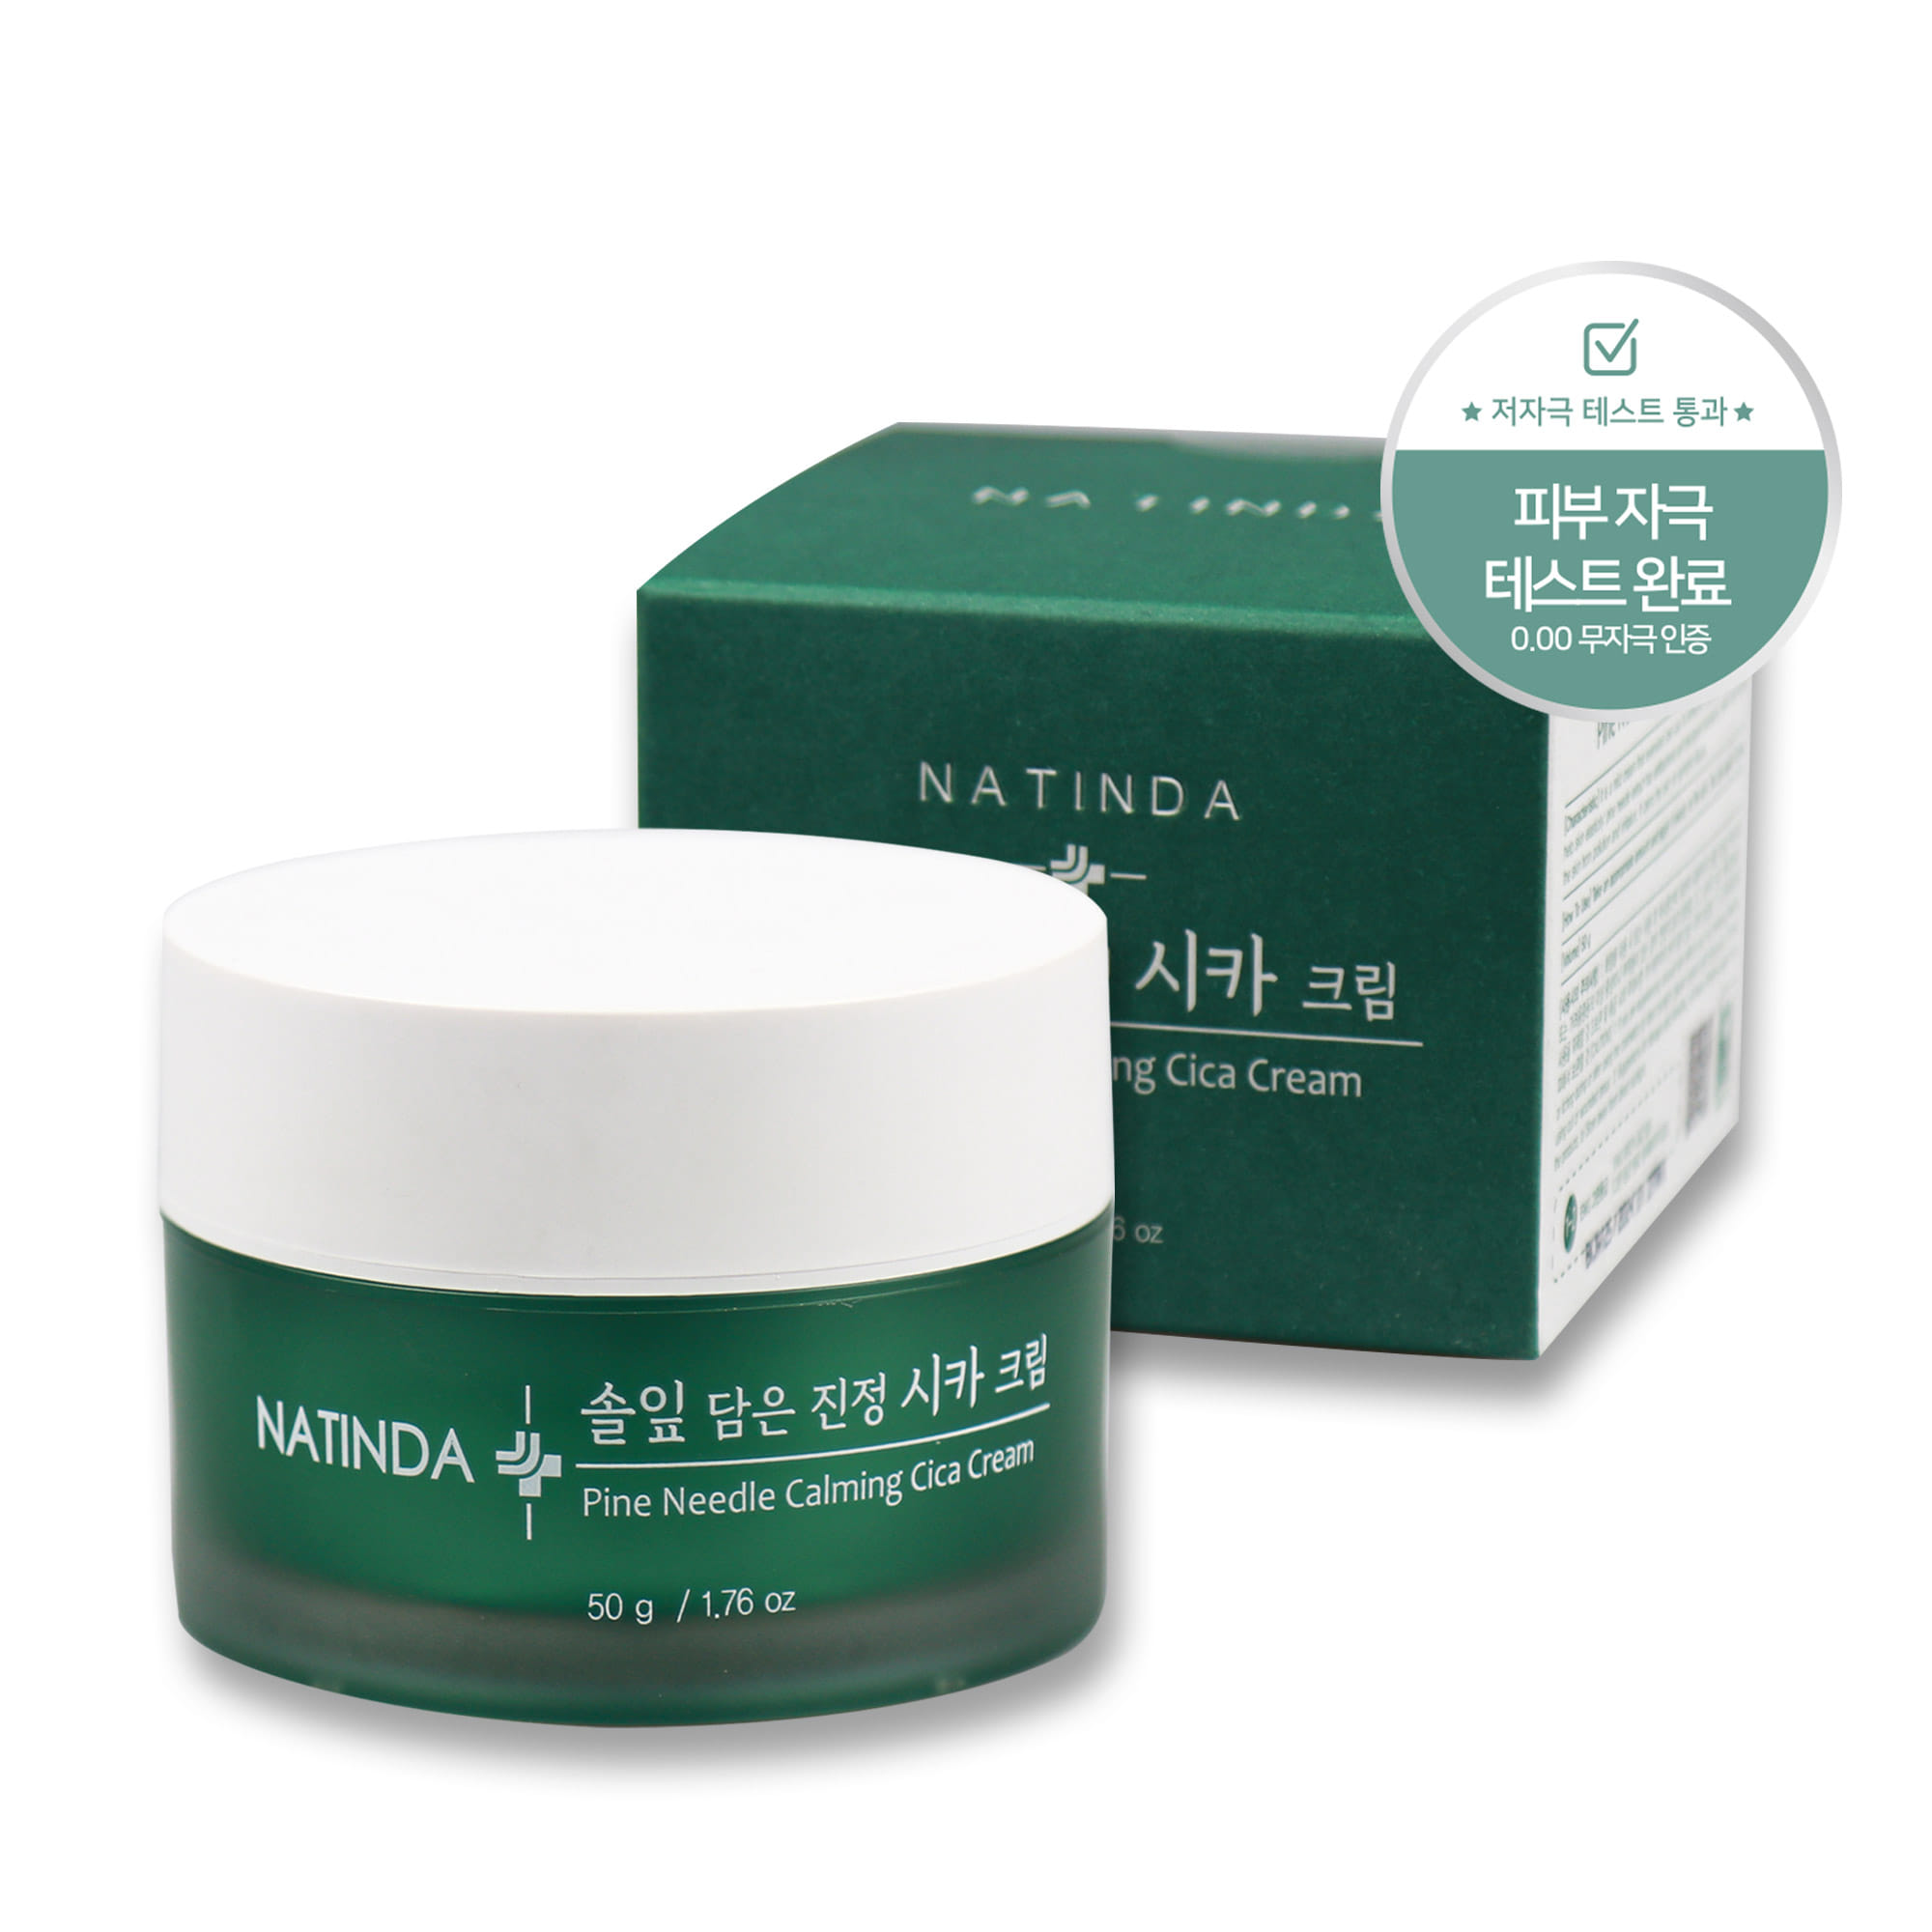 Natinda Pineapple Dam is a soothing chica cream 50g / All-in-one soothing care solution.